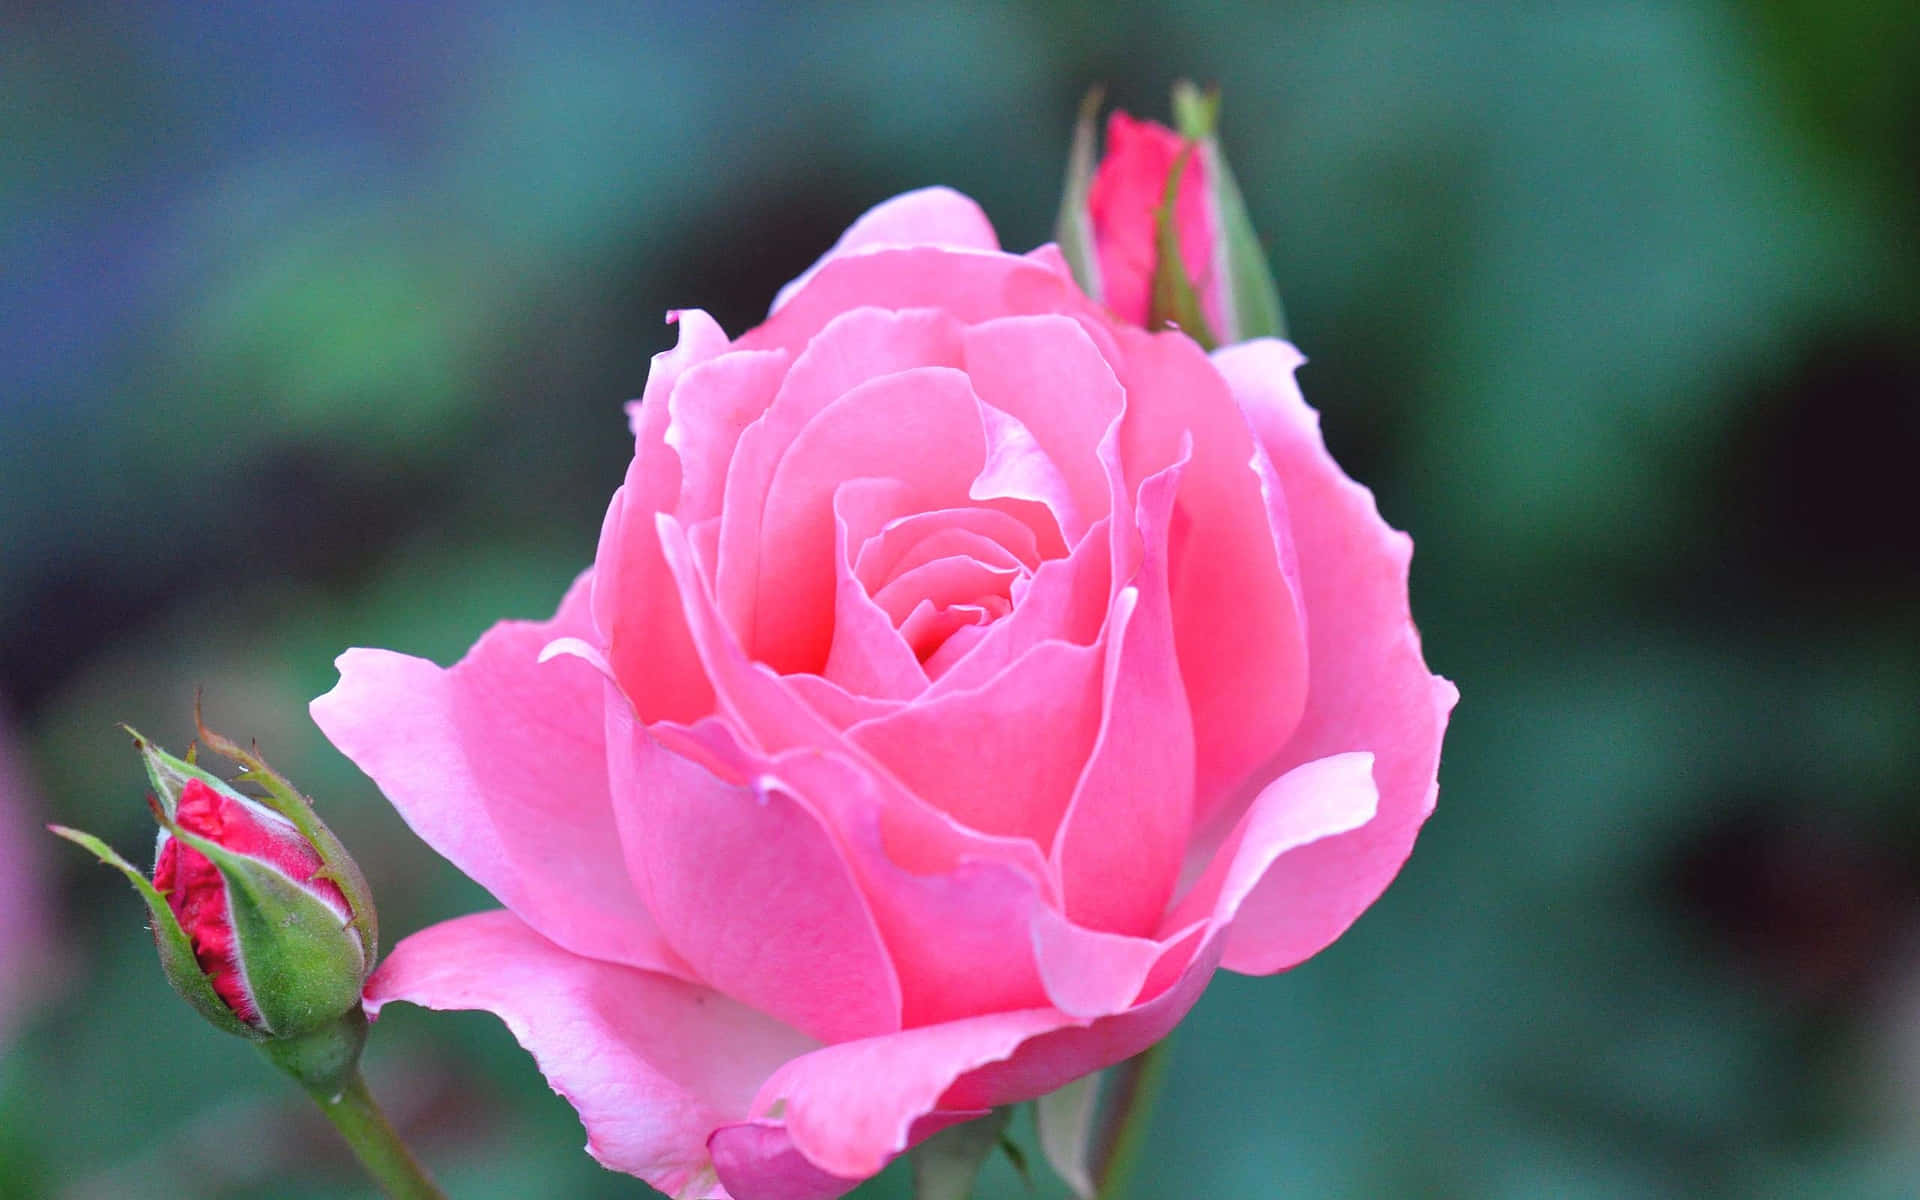 A Pink Rose Is Blooming In A Garden